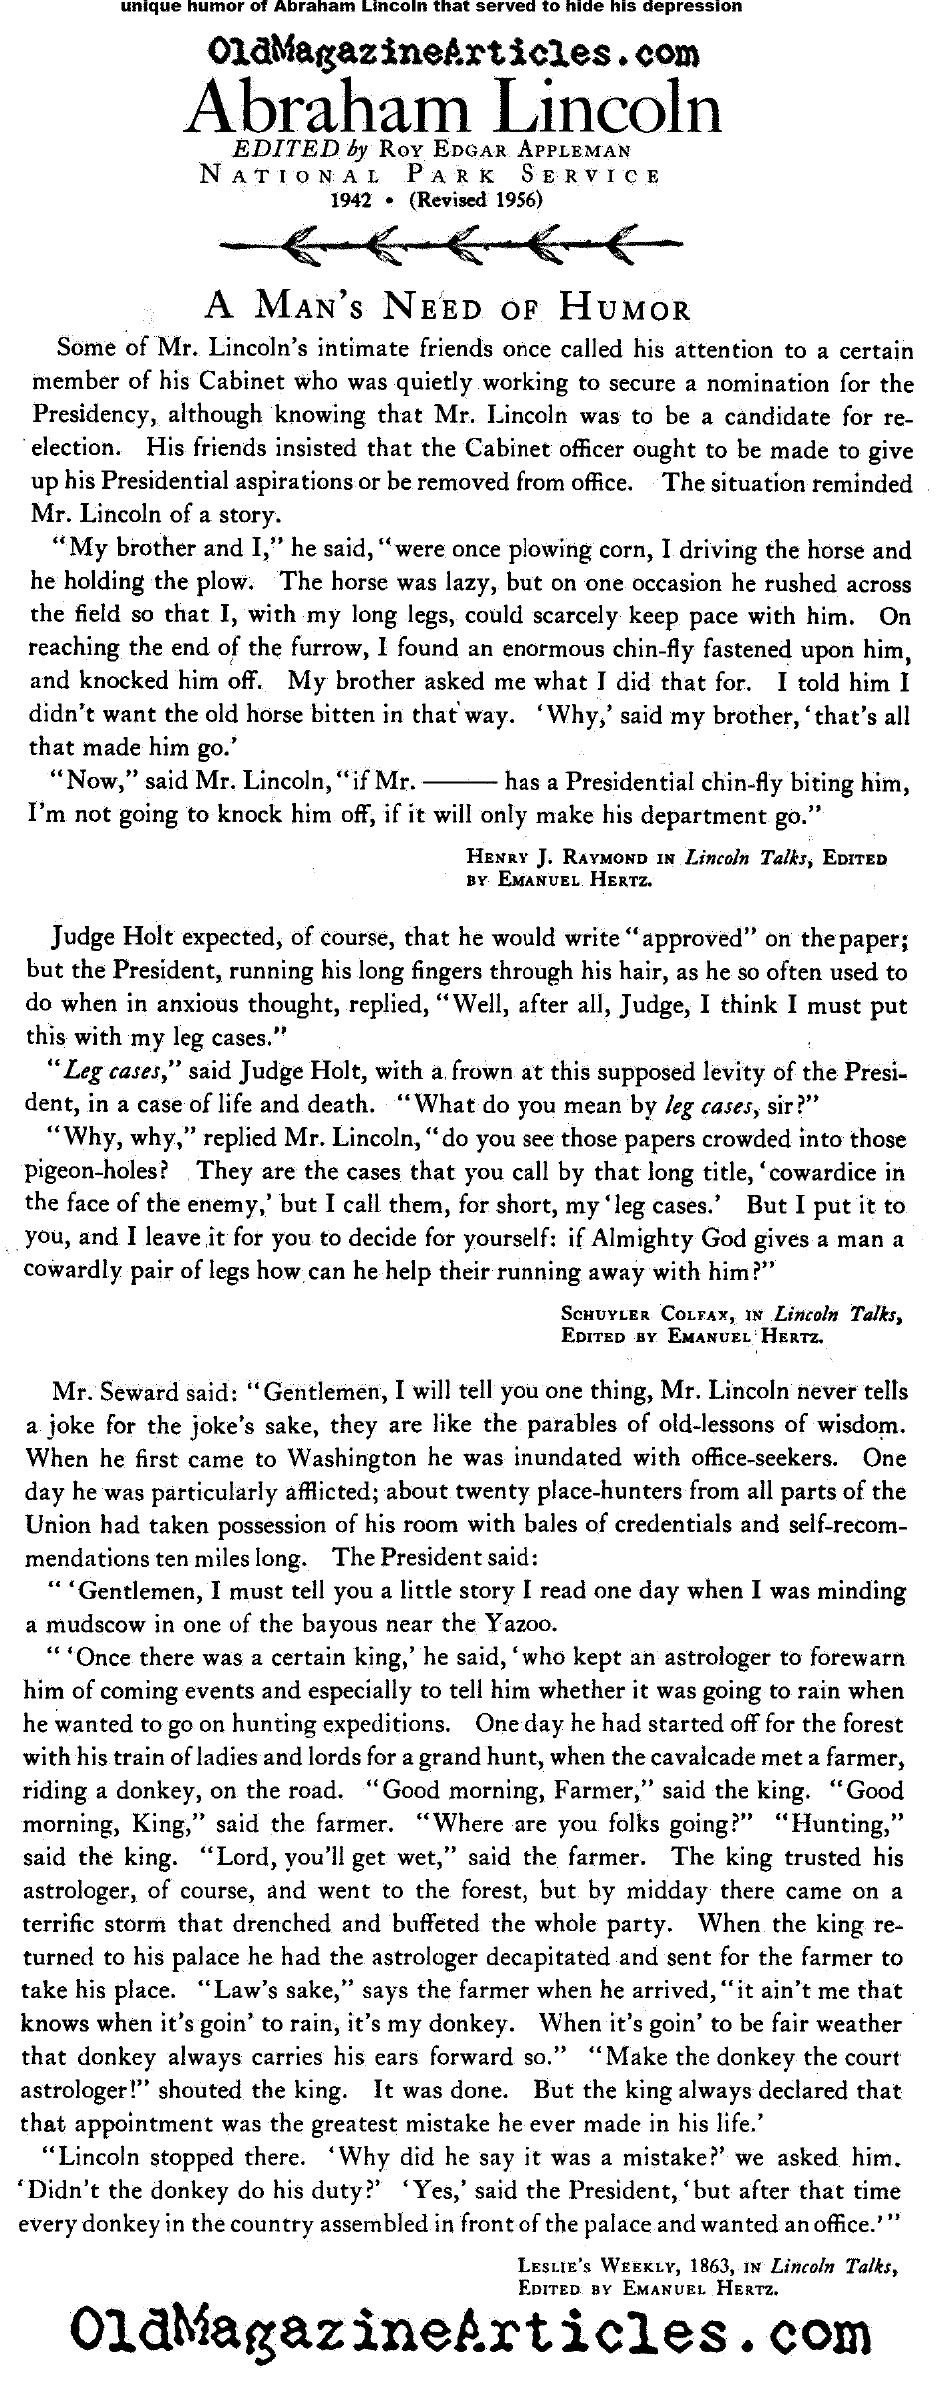 The Depression and Humor of President Lincoln (National Park Service, 1956)